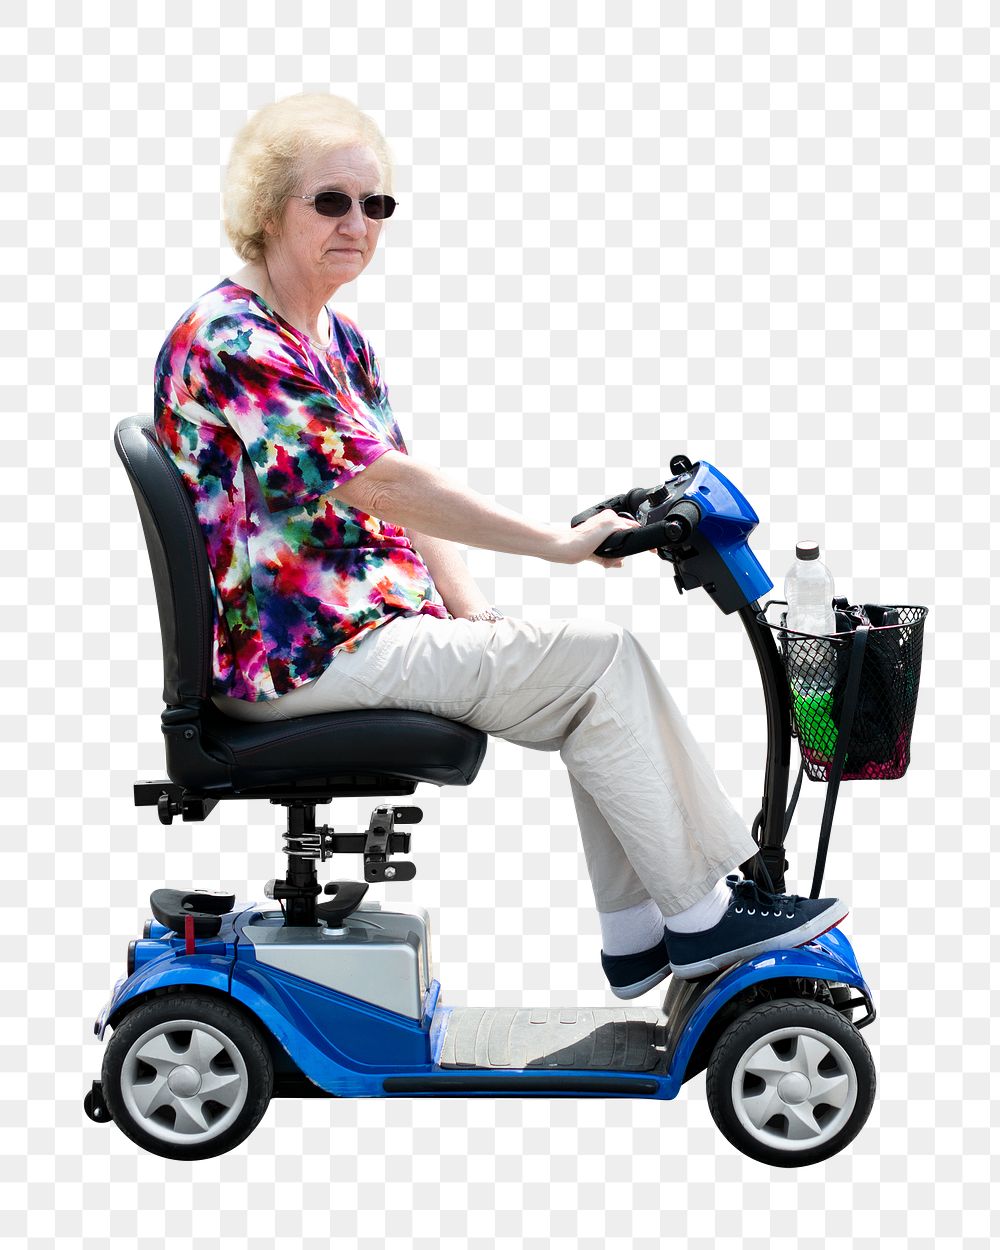 Old woman png riding mobility scooter, senior healthcare concept